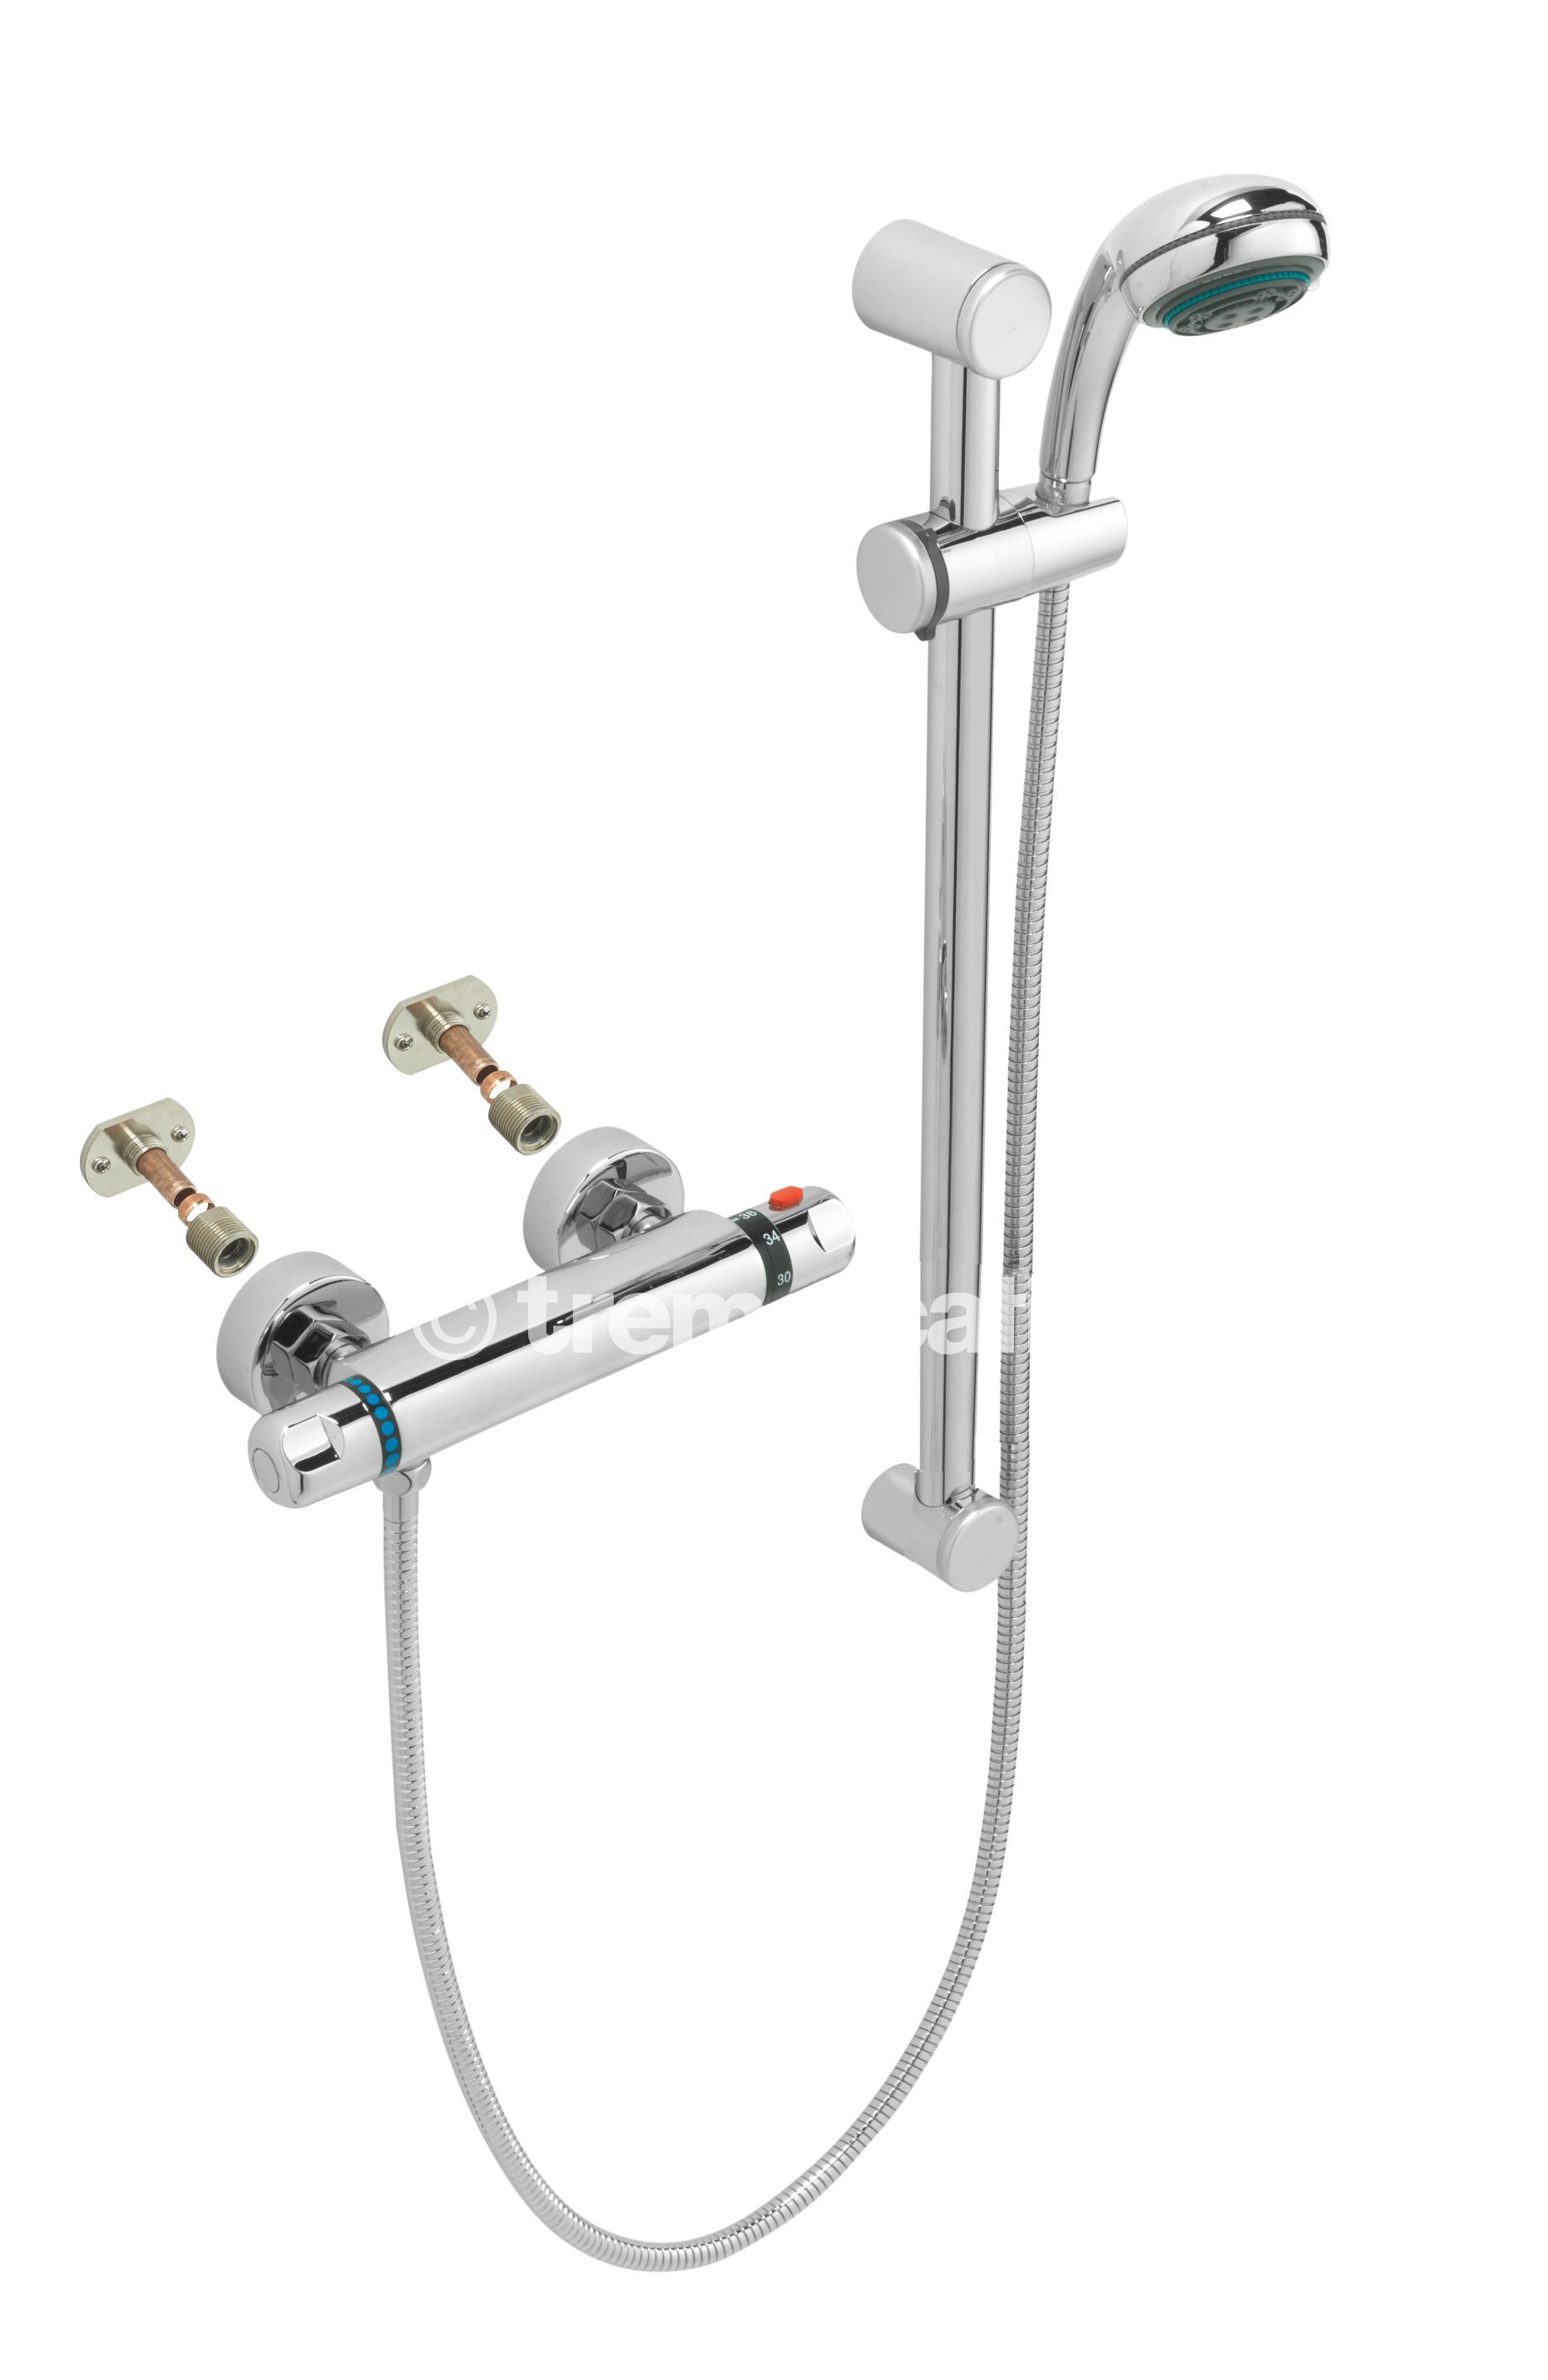 Tre Mercati Value Exposed Thermostatic Shower Valve Complete With Multi Function Kit and Easy Fix Fittings Chrome Plated